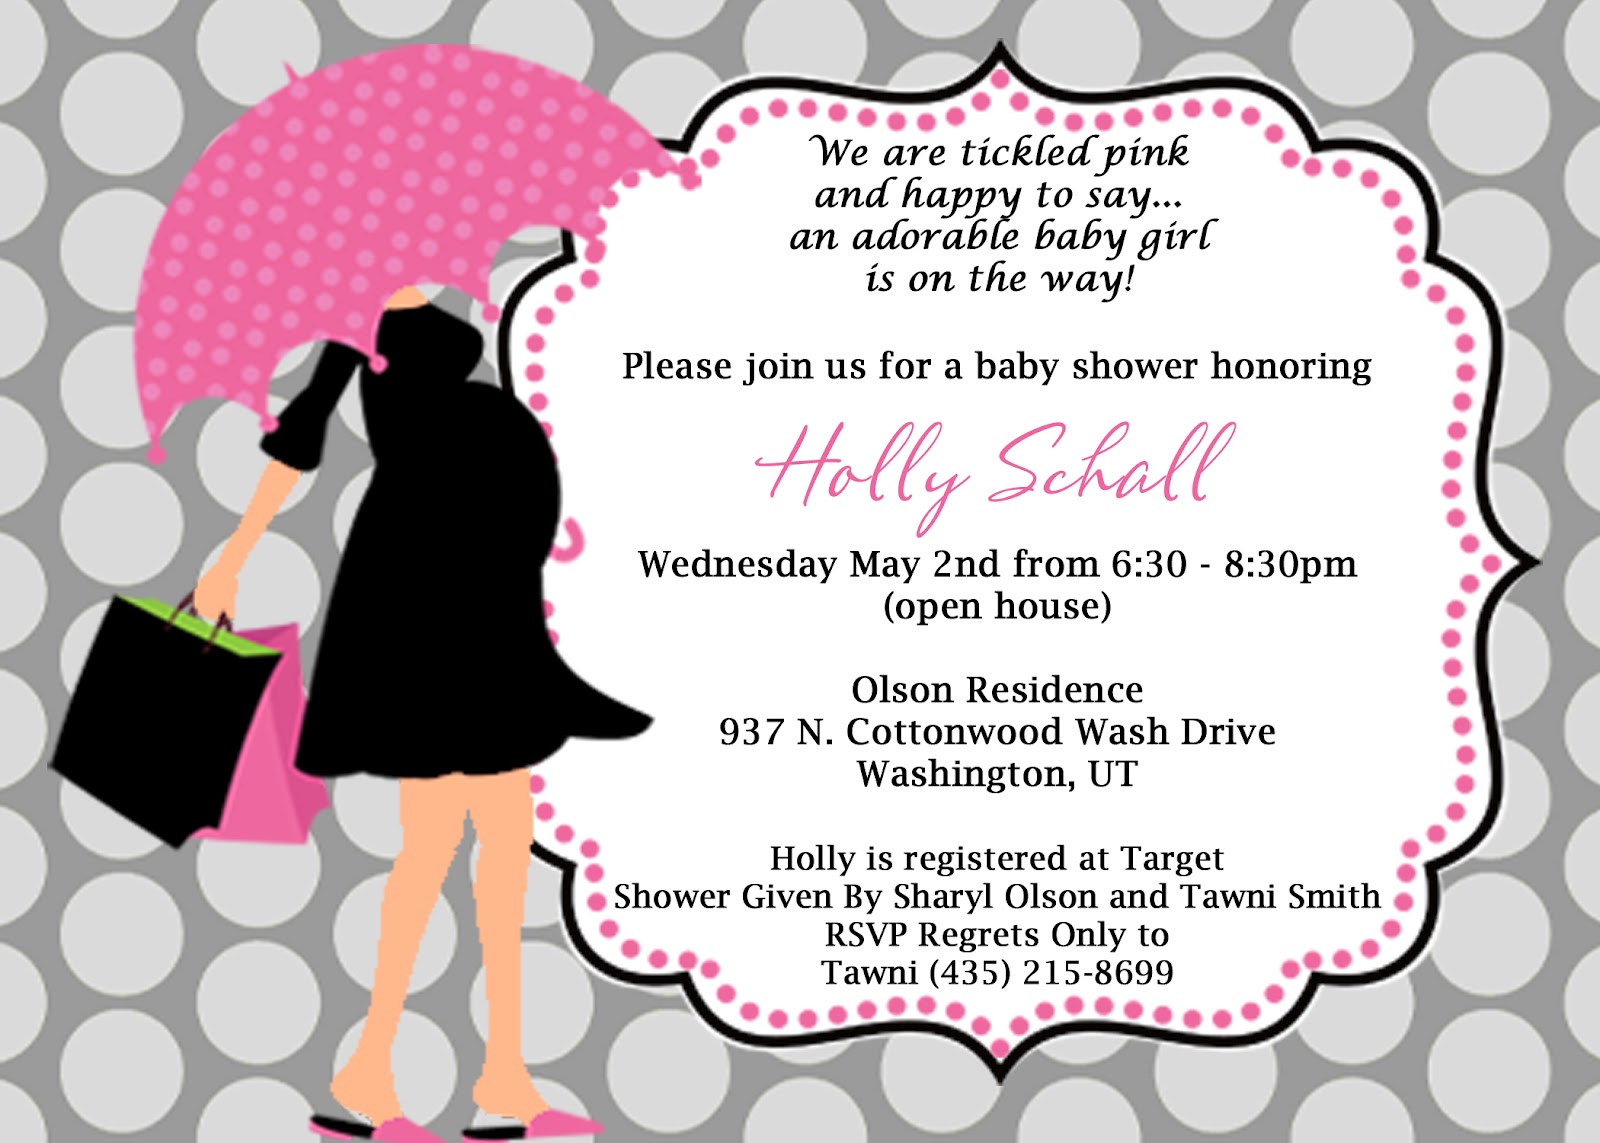 Download wallpaper for 1152x864 resolution | Funny Baby Shower Invitation  Hd | cute | Wallpaper Better